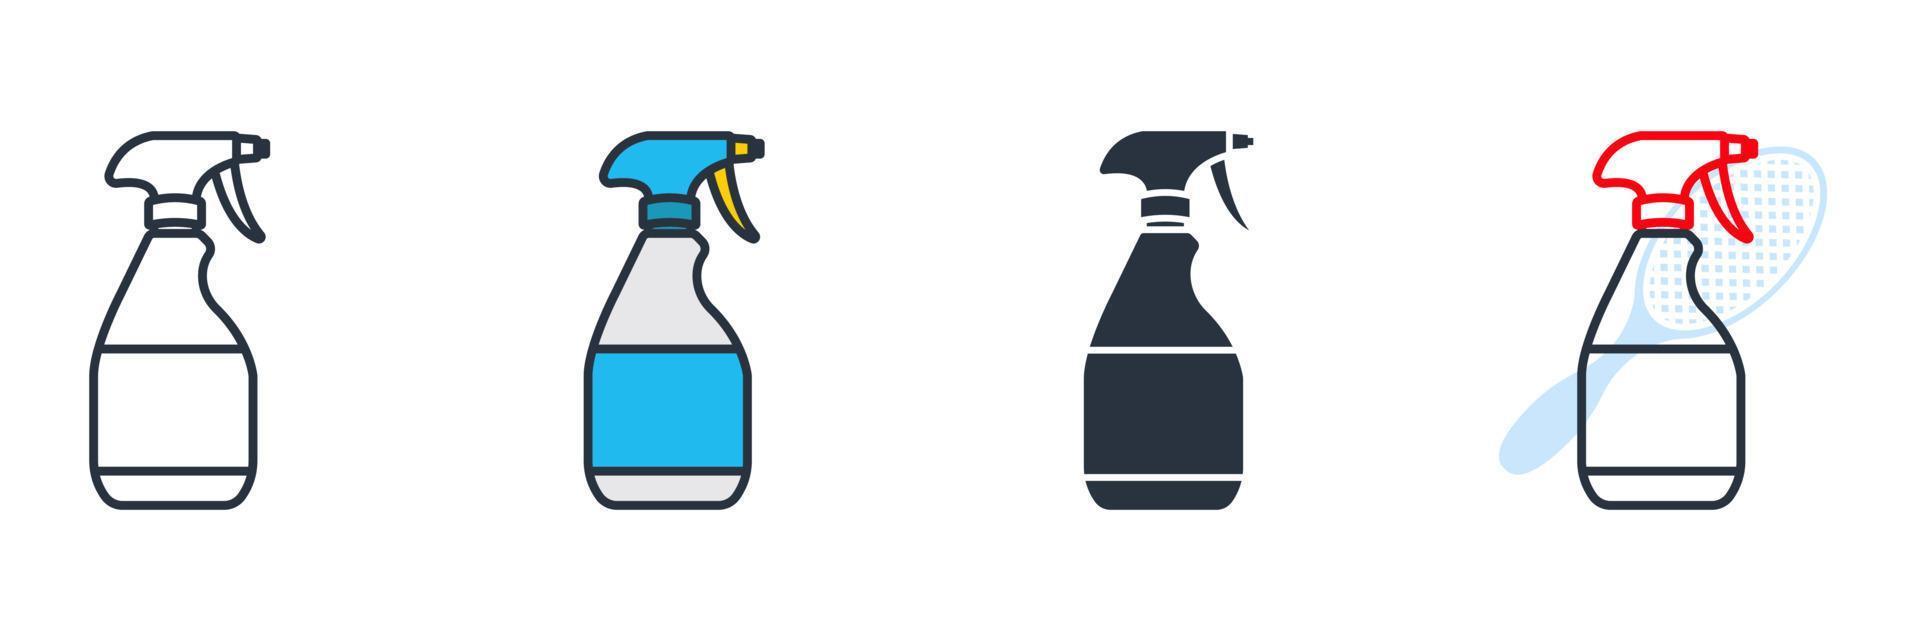 Spray bottle icon logo vector illustration. Spray bottle symbol template for graphic and web design collection